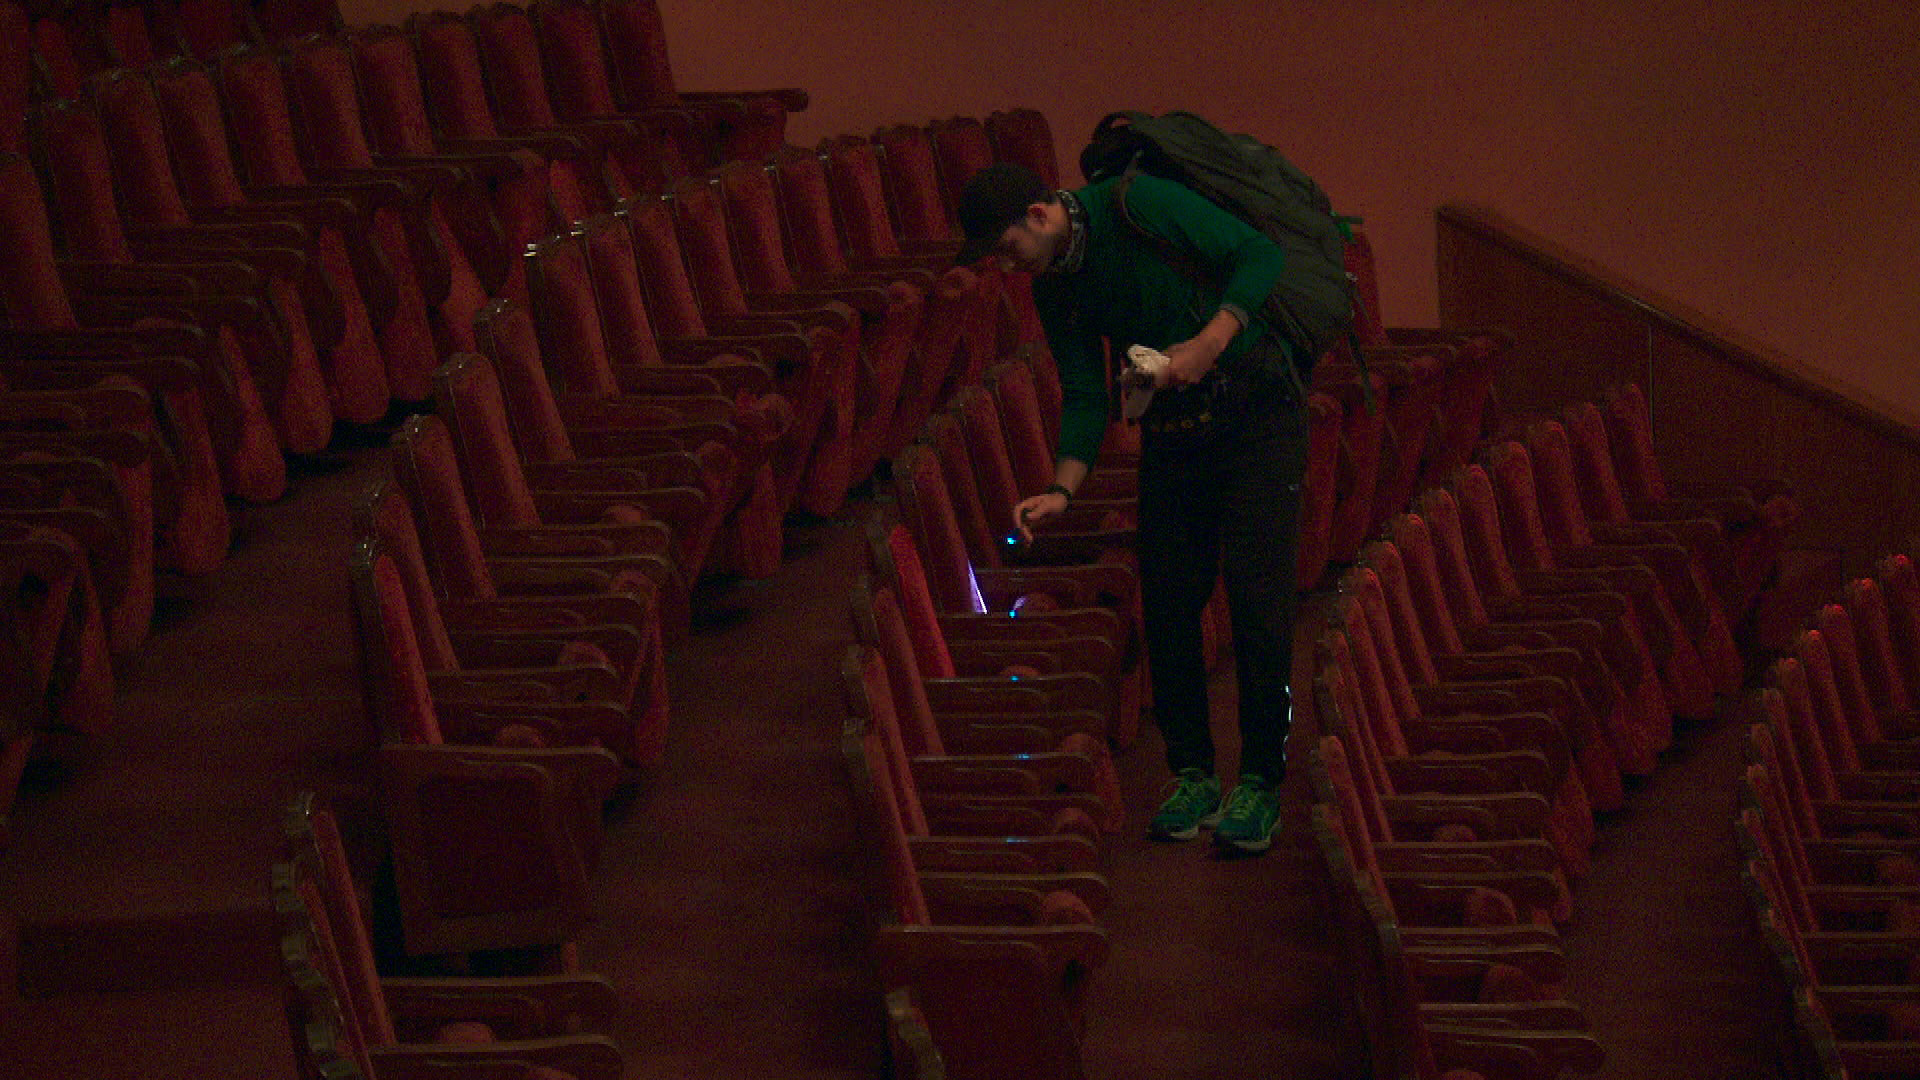 Korey searches for a clue at the Yerevan Opera Theater.